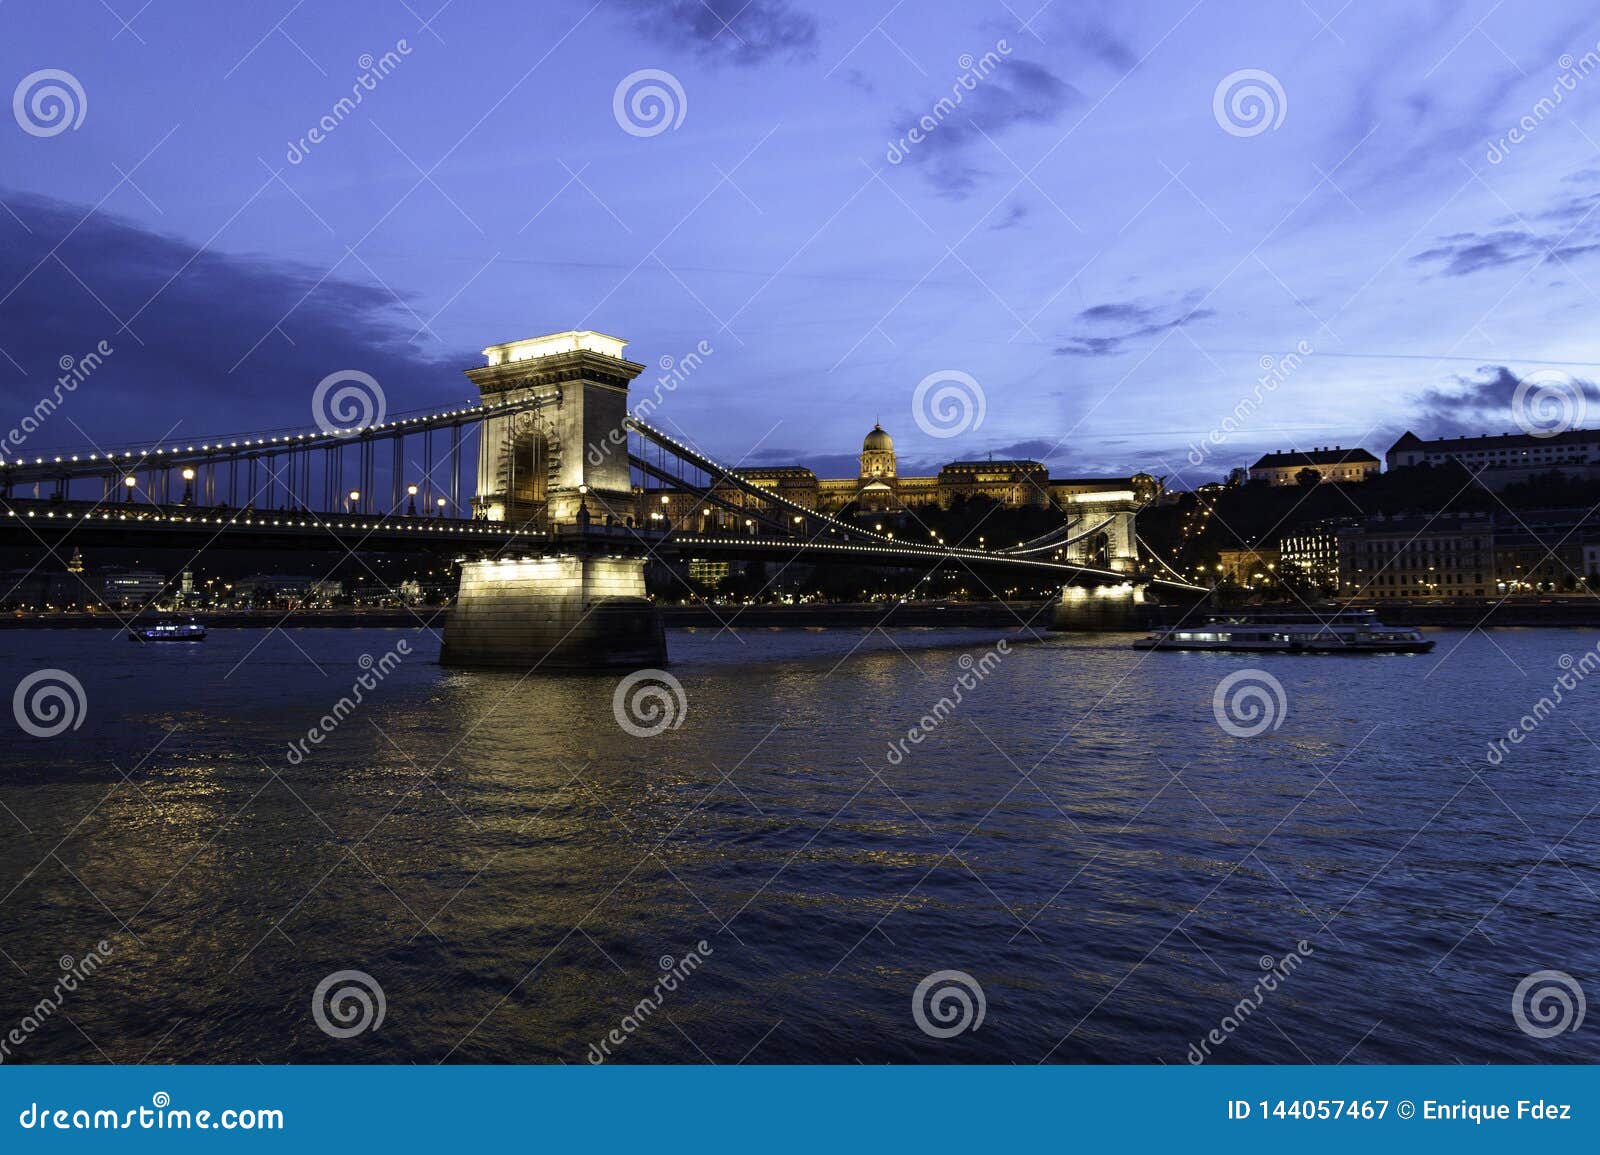 view of the chain bridge at dusk, budapest, hungary